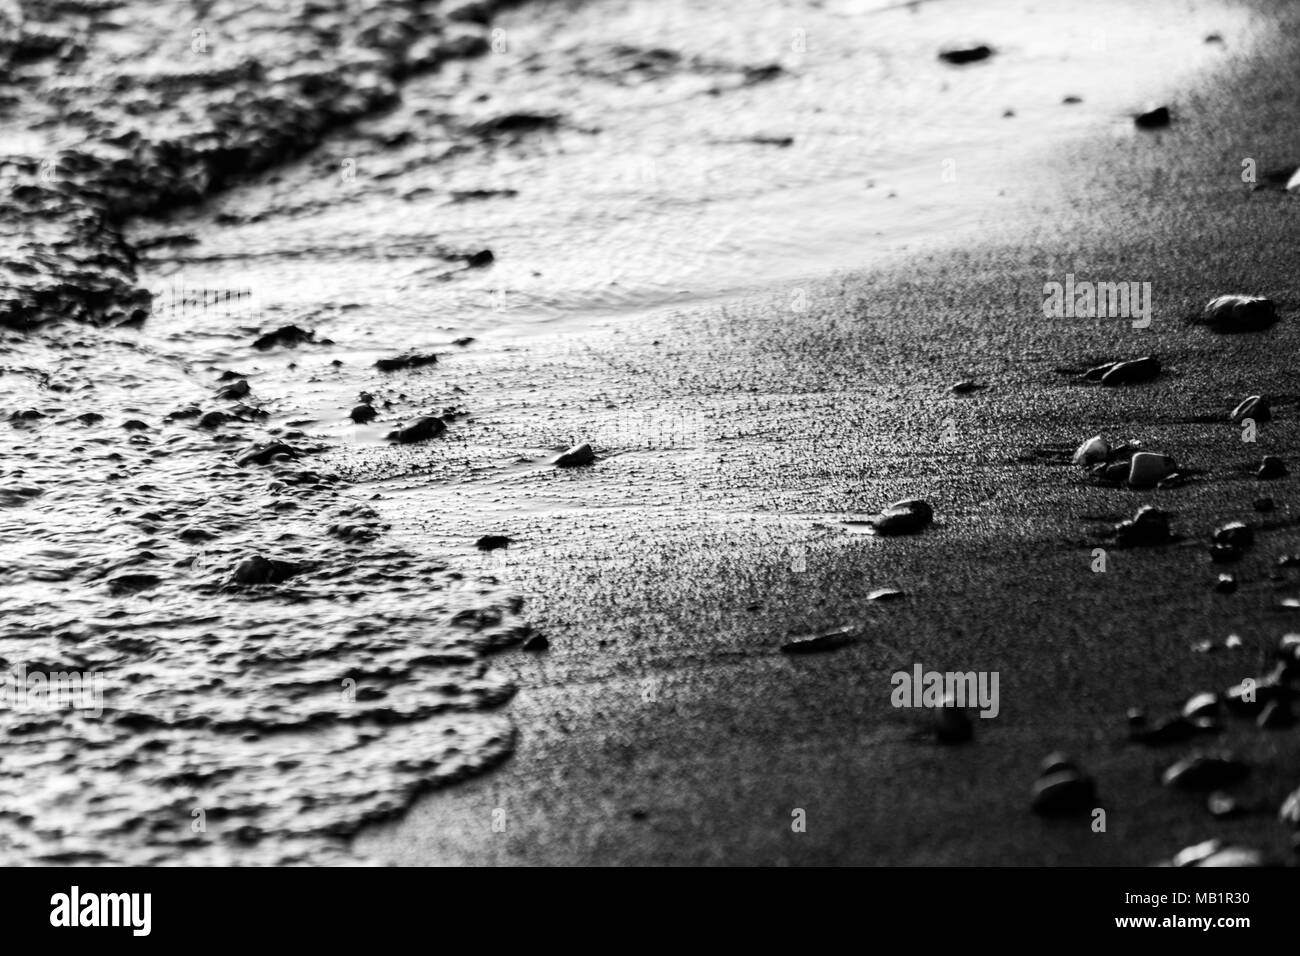 A close view of water on a lake shore at sunset, with details of sands and little round stones Stock Photo